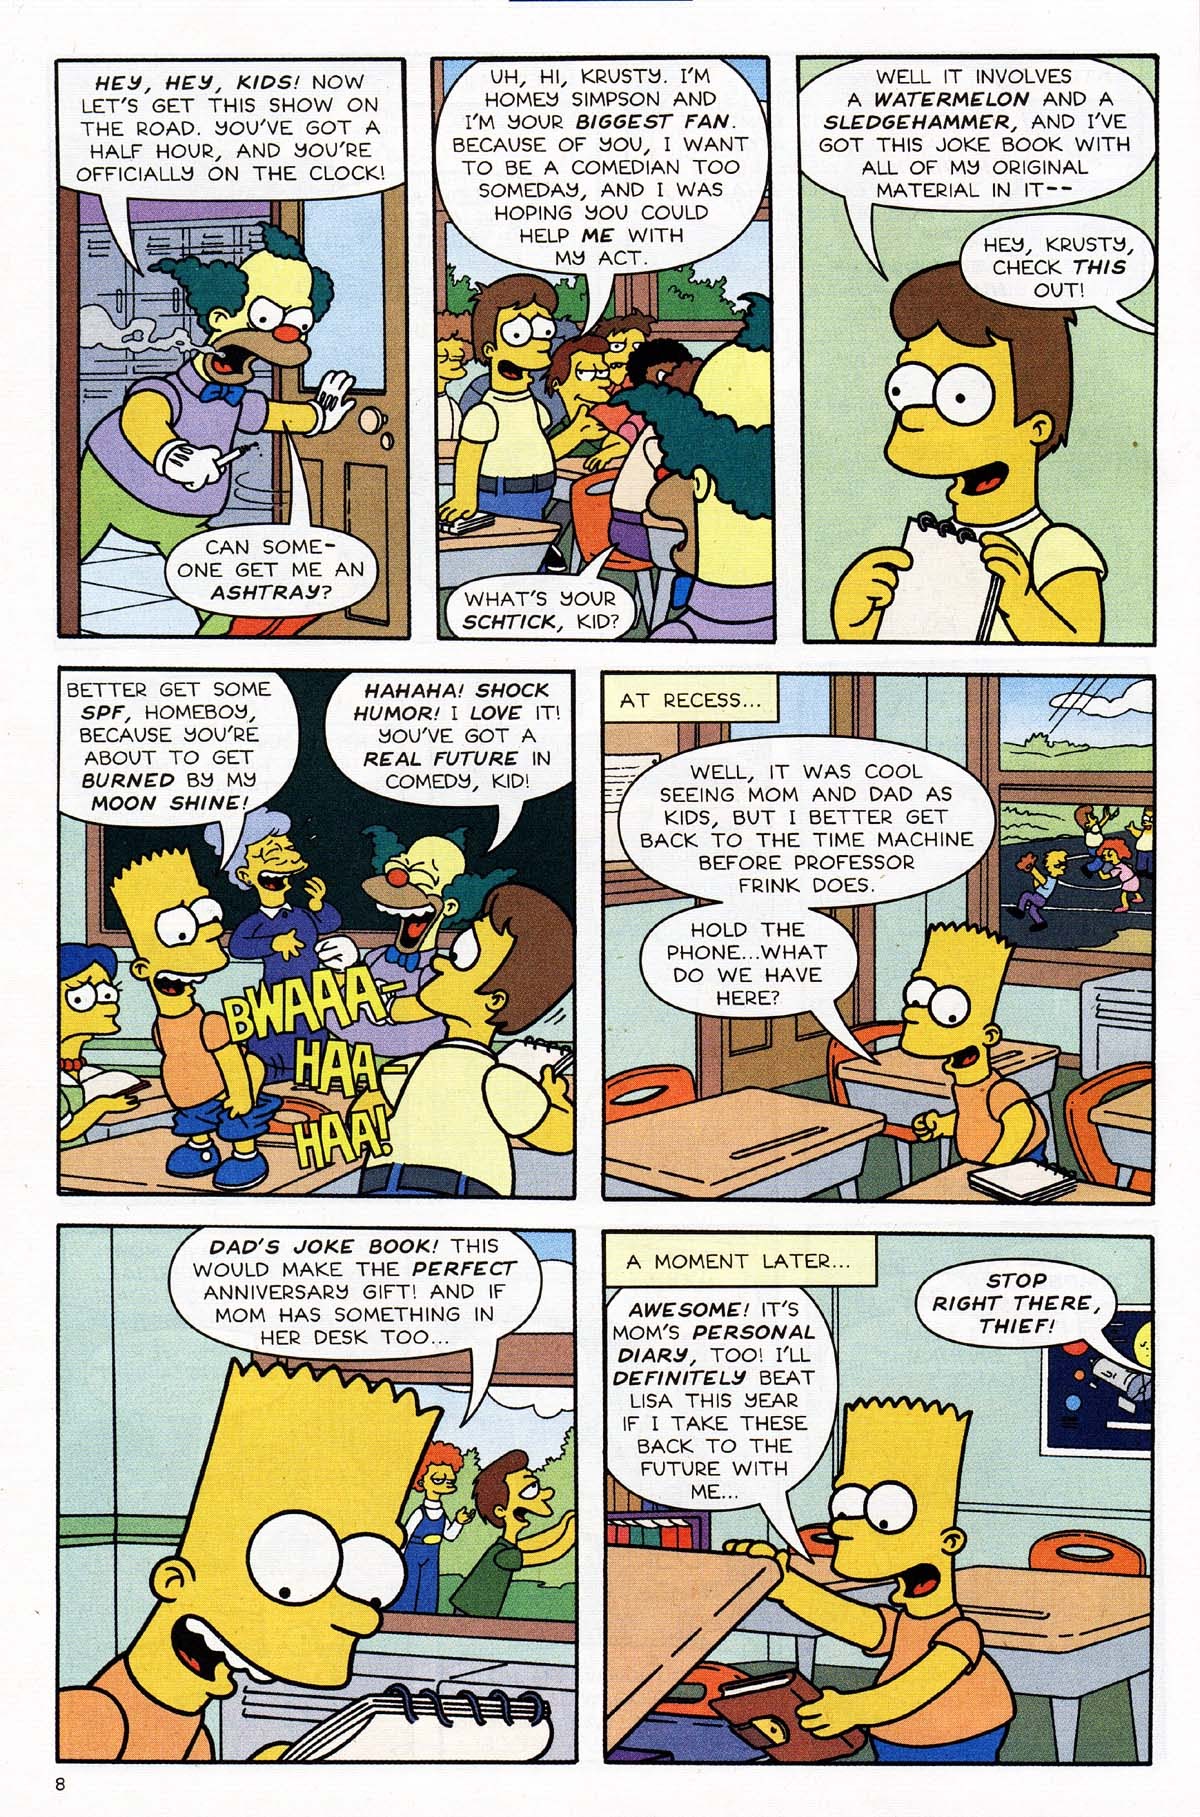 Read online Bart Simpson comic -  Issue #14 - 10